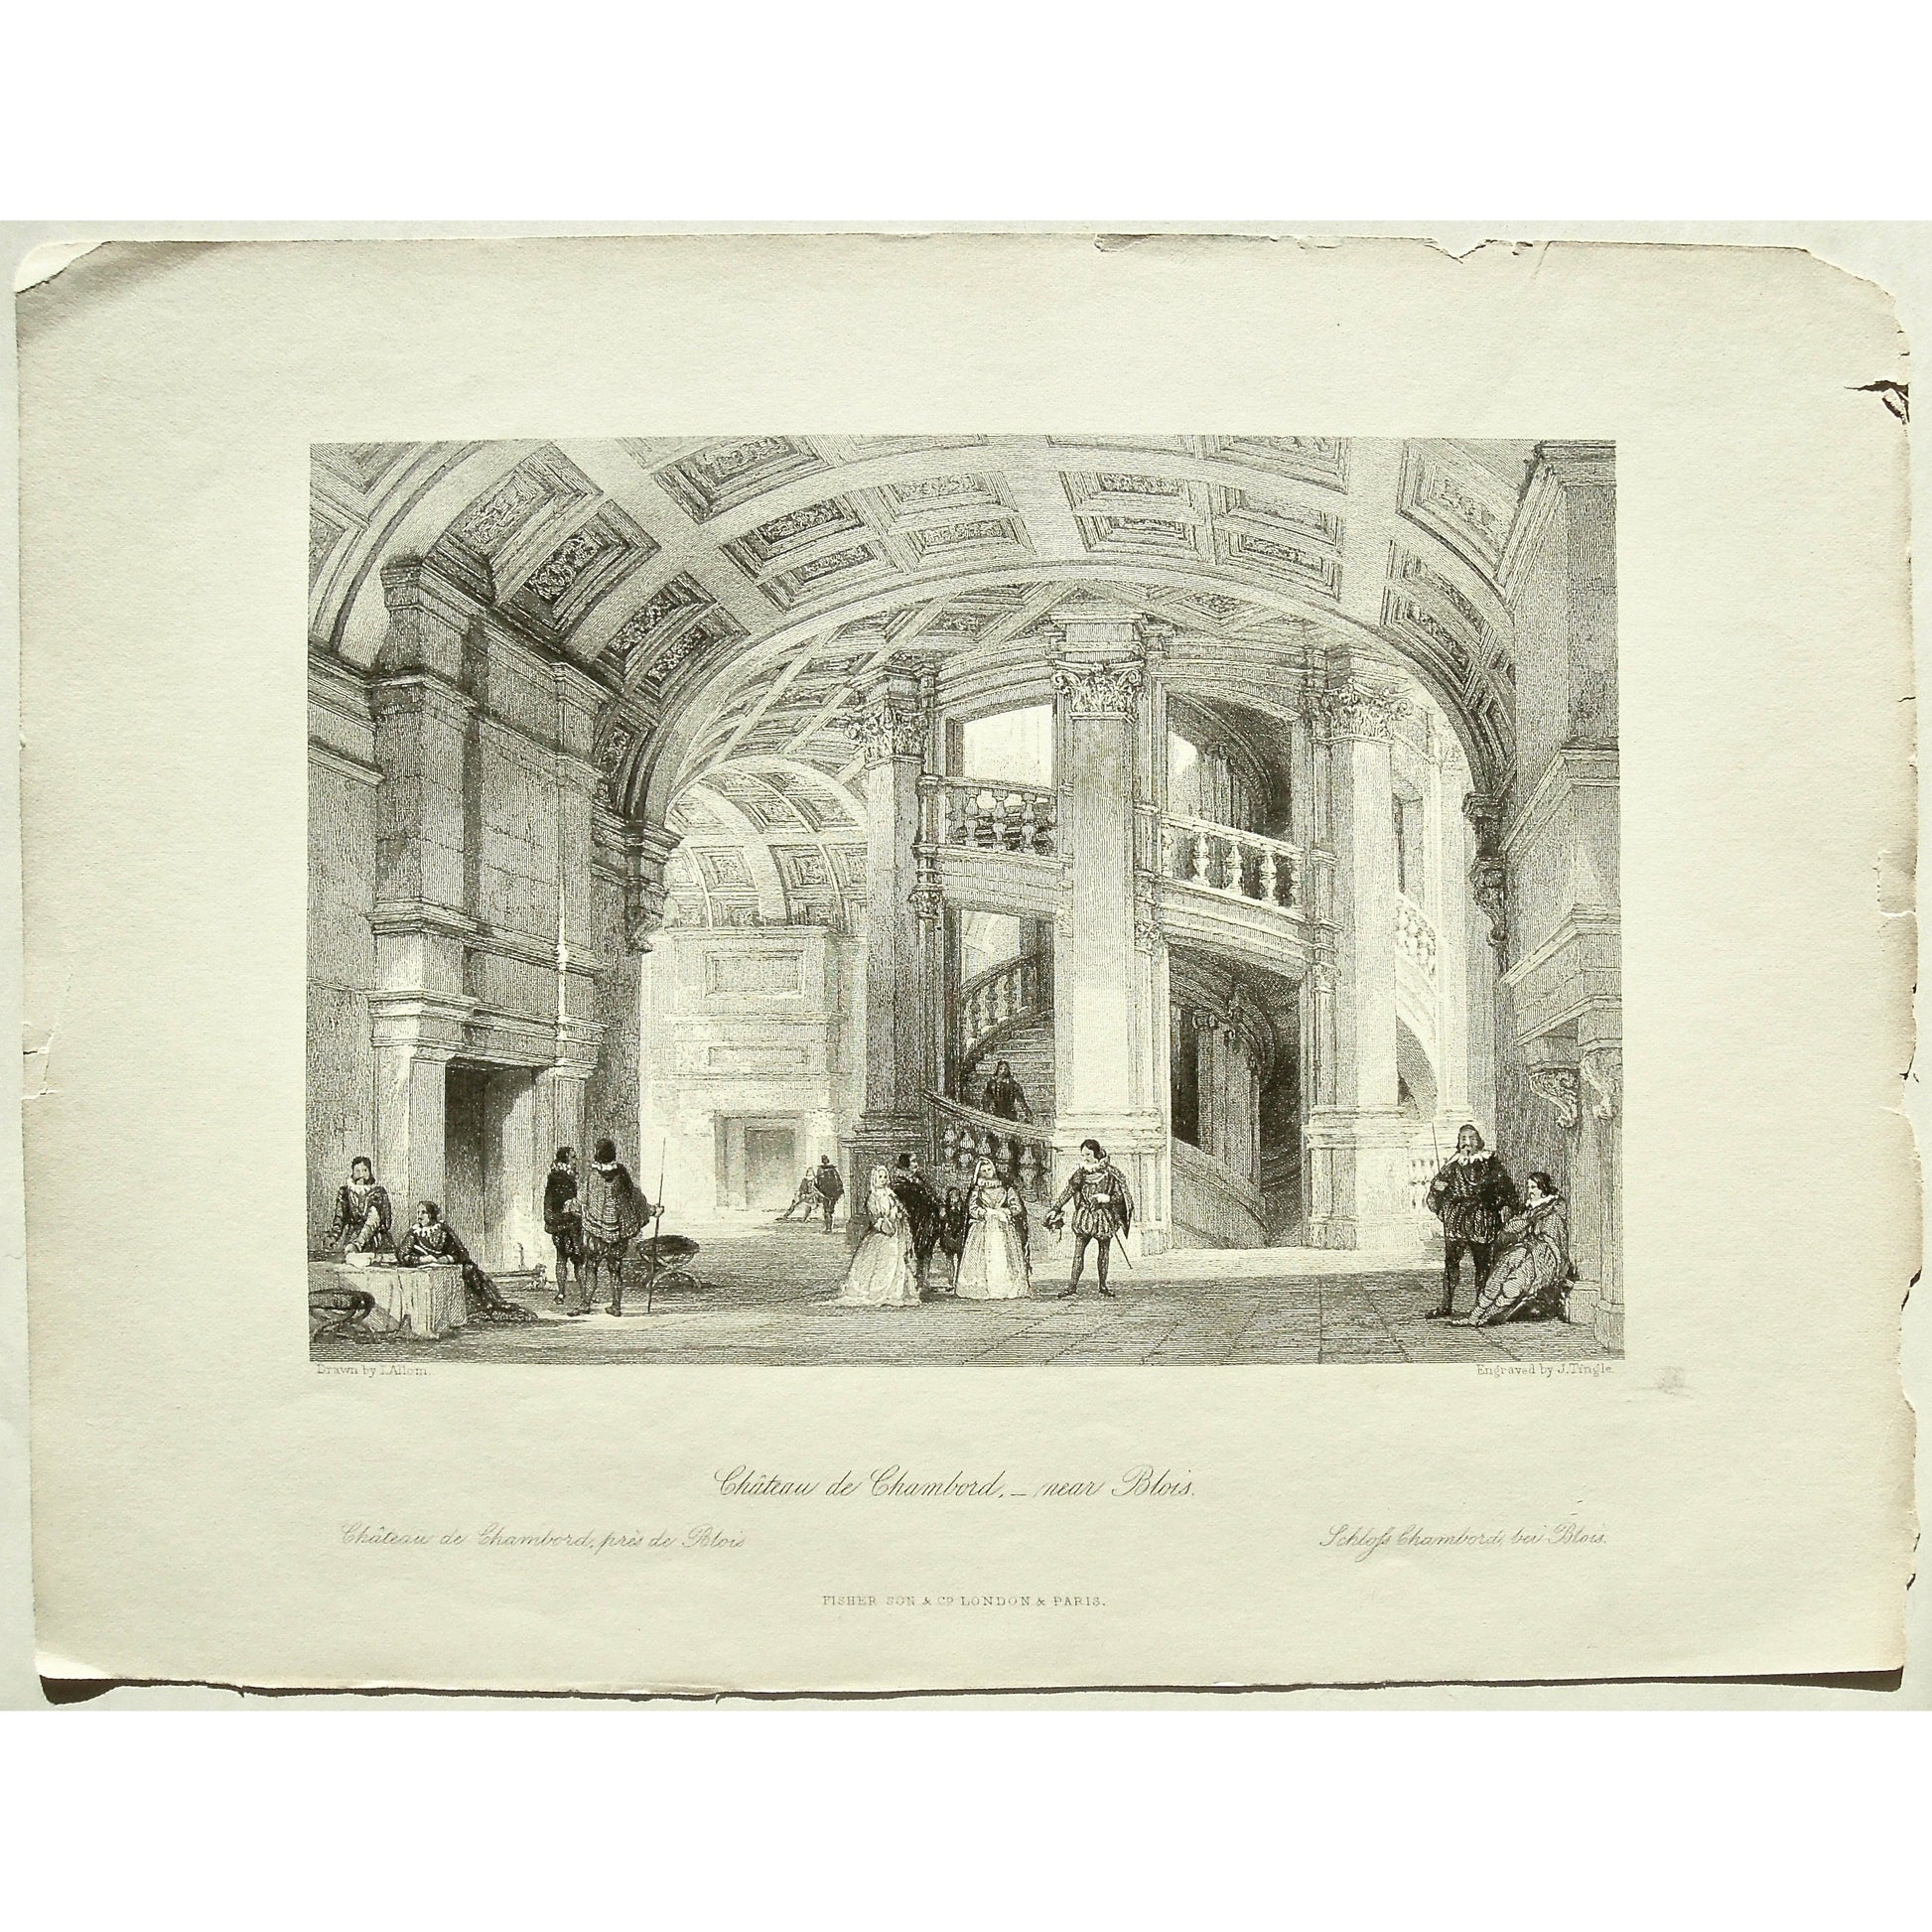 France, France Illustrated, Exhibiting its Landscape Scenery, Antiquities, Military and Ecclesiastical Architecture, Thomas Allom, Allom, Fisher, Son & Co., London, Paris, Reverend George Newenham, Newenham, Caxton Press, Angel St., Martin's-Le-Grand, Mandeville, Neuve Vivienne, 1845, château, Château, de Chambord, Chambord, Party, parties, events, coffered ceiling, ceiling, arched ceiling, architecture, Blois, Costume, dress, spiral staircase, castle, ruffled collars, antique prints, antique, prints, art